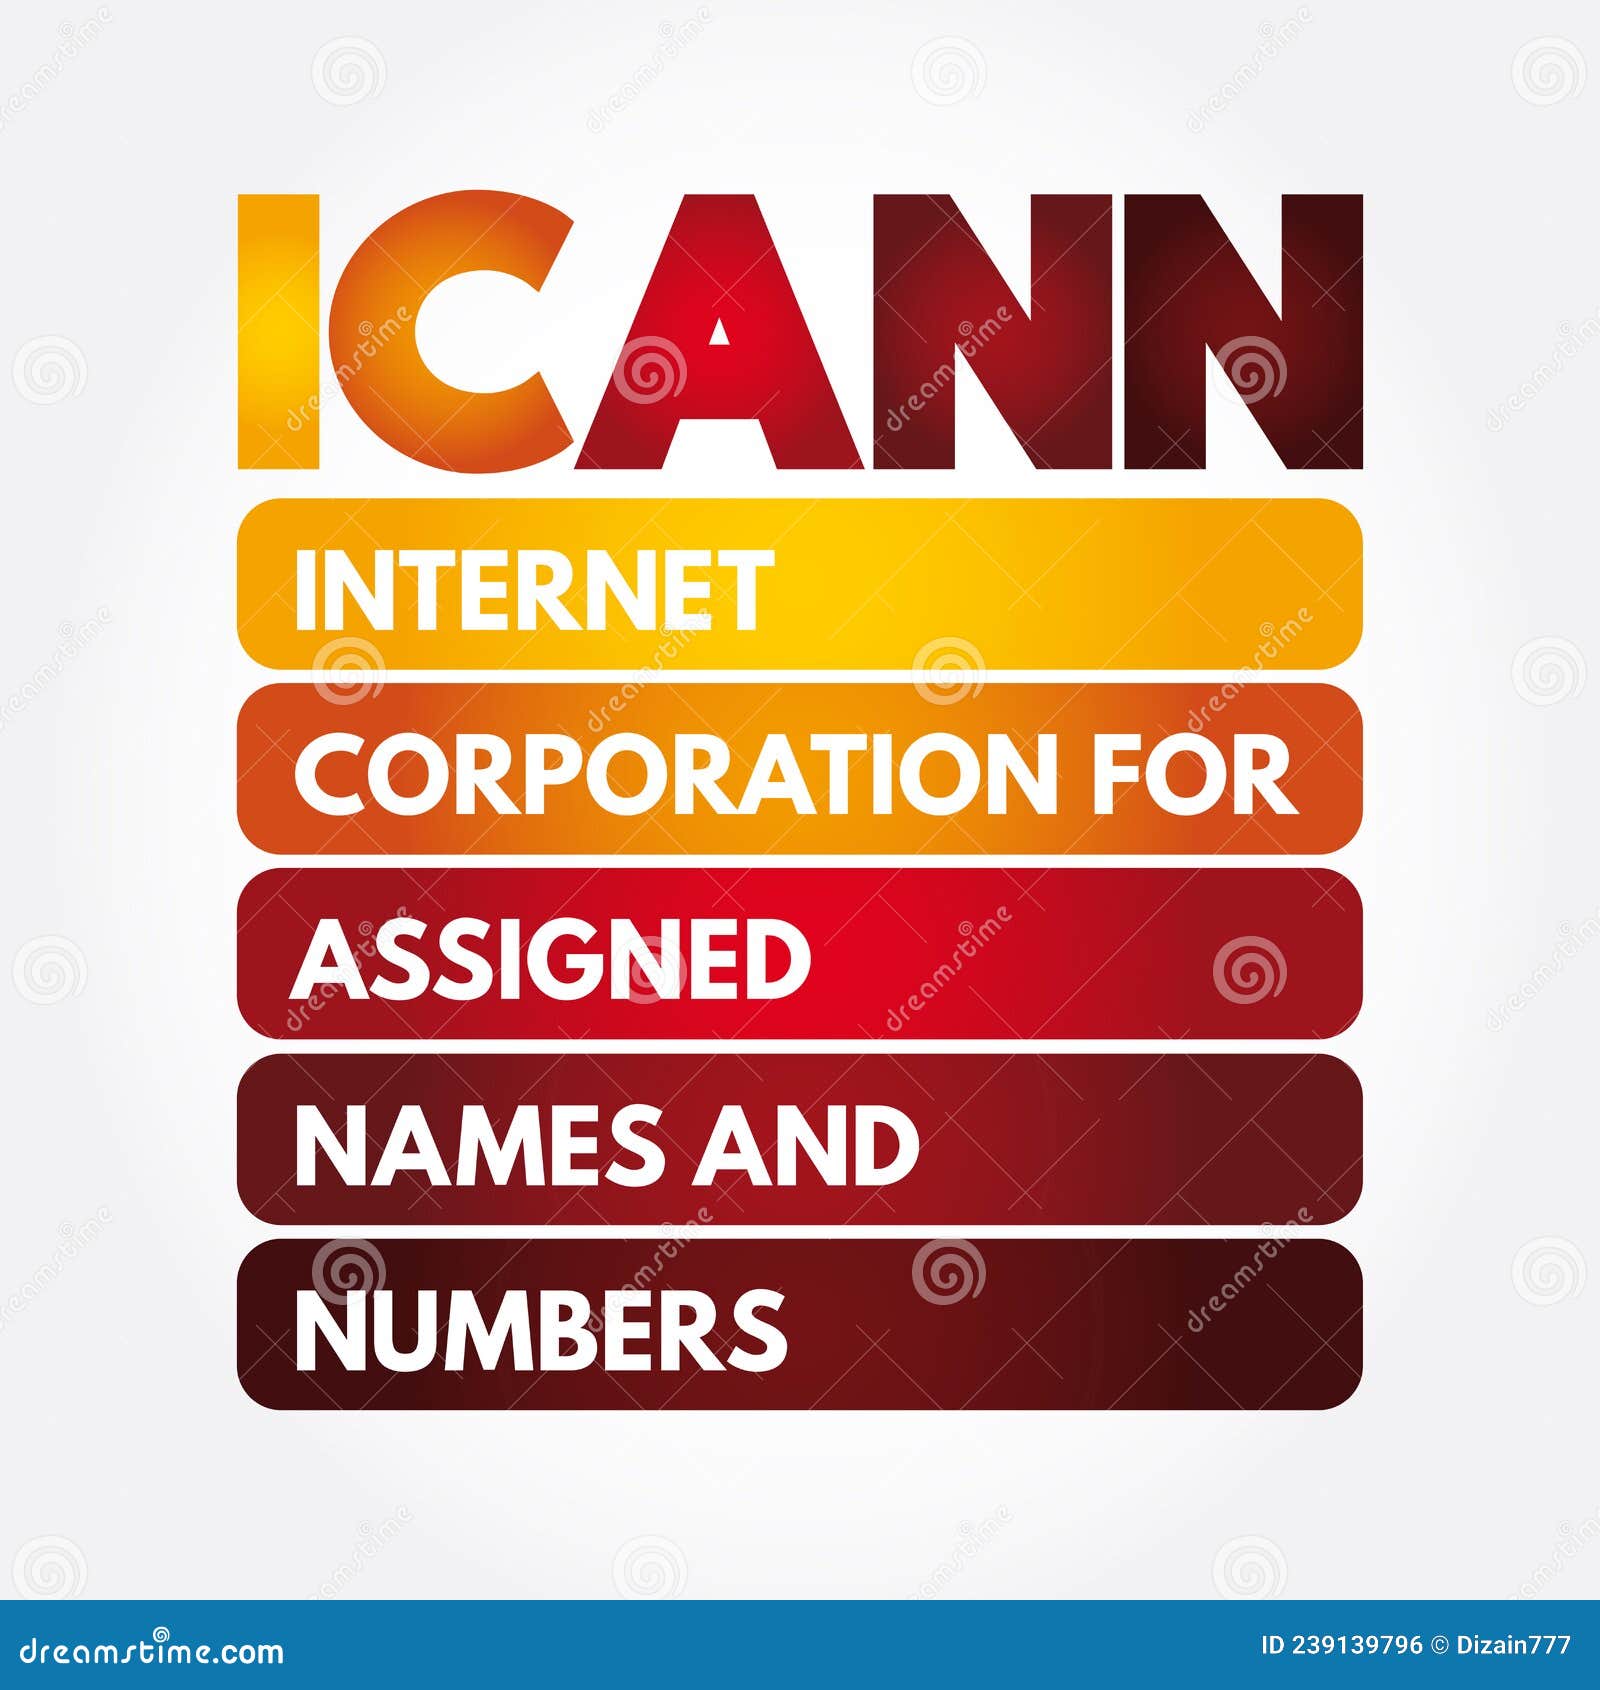 what is the internet corporation for assigned names and numbers charged with doing